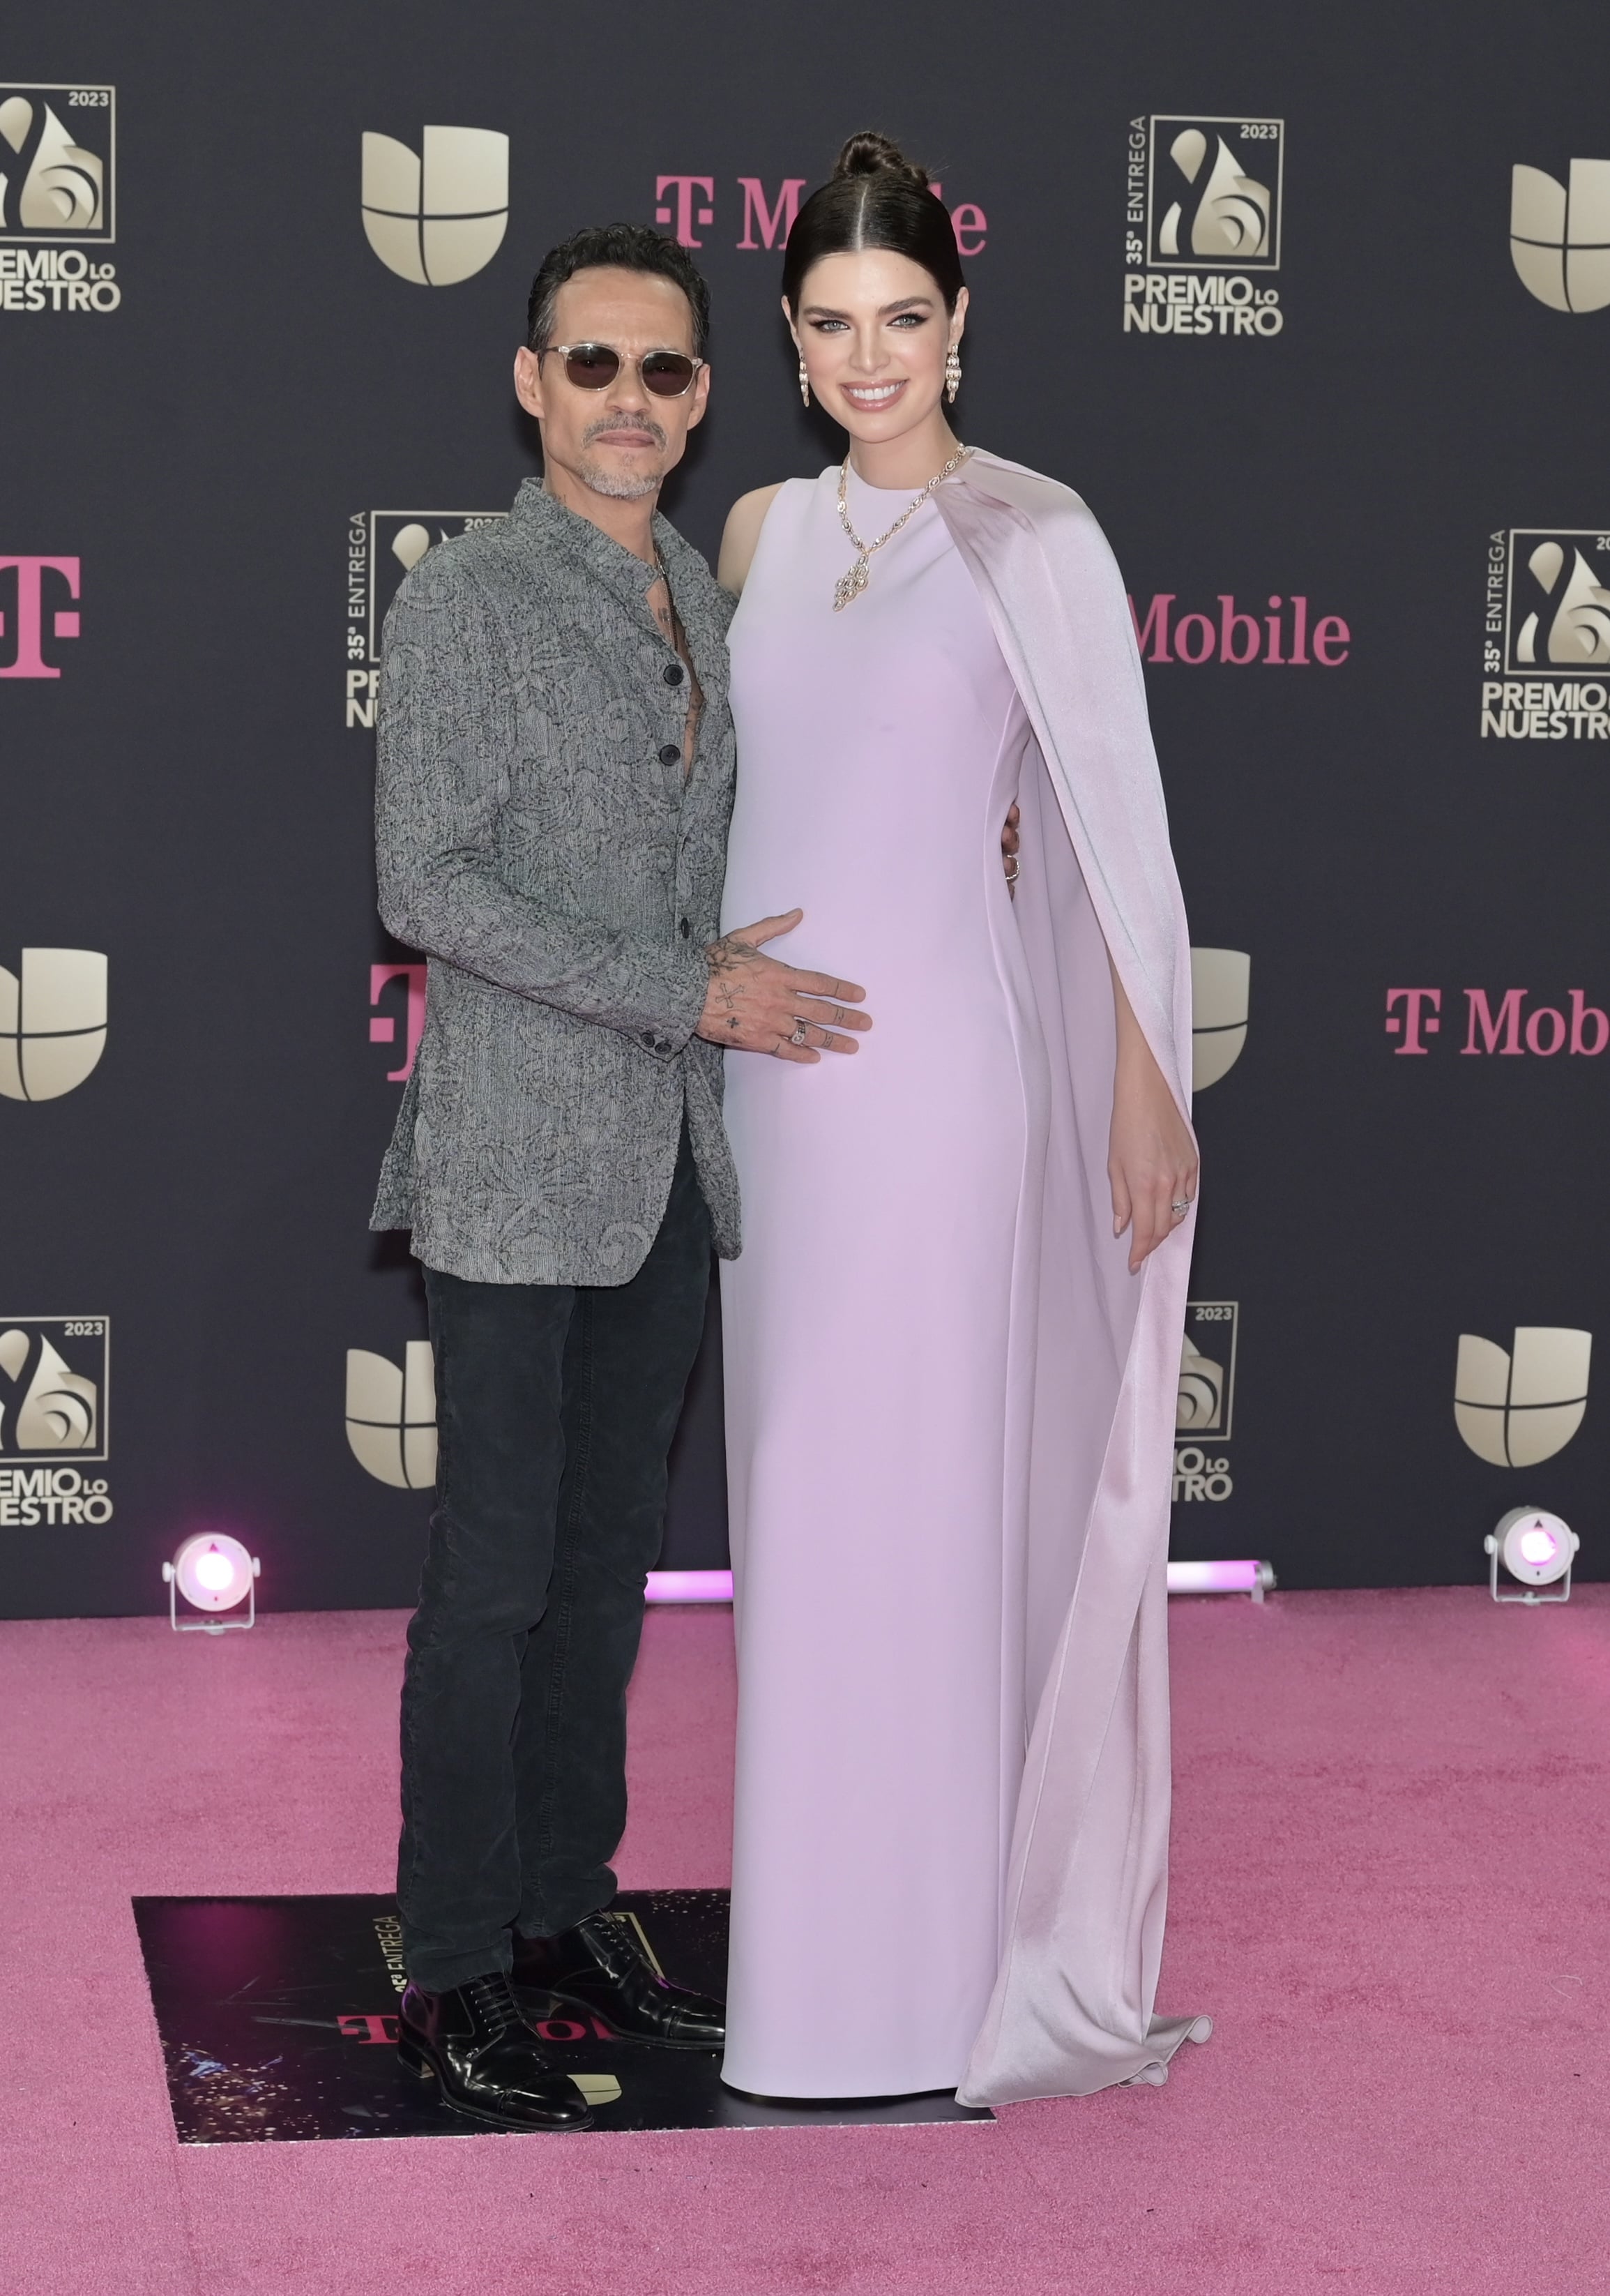 Marc Anthony, Nadia Ferreira, and more stars at the WBC